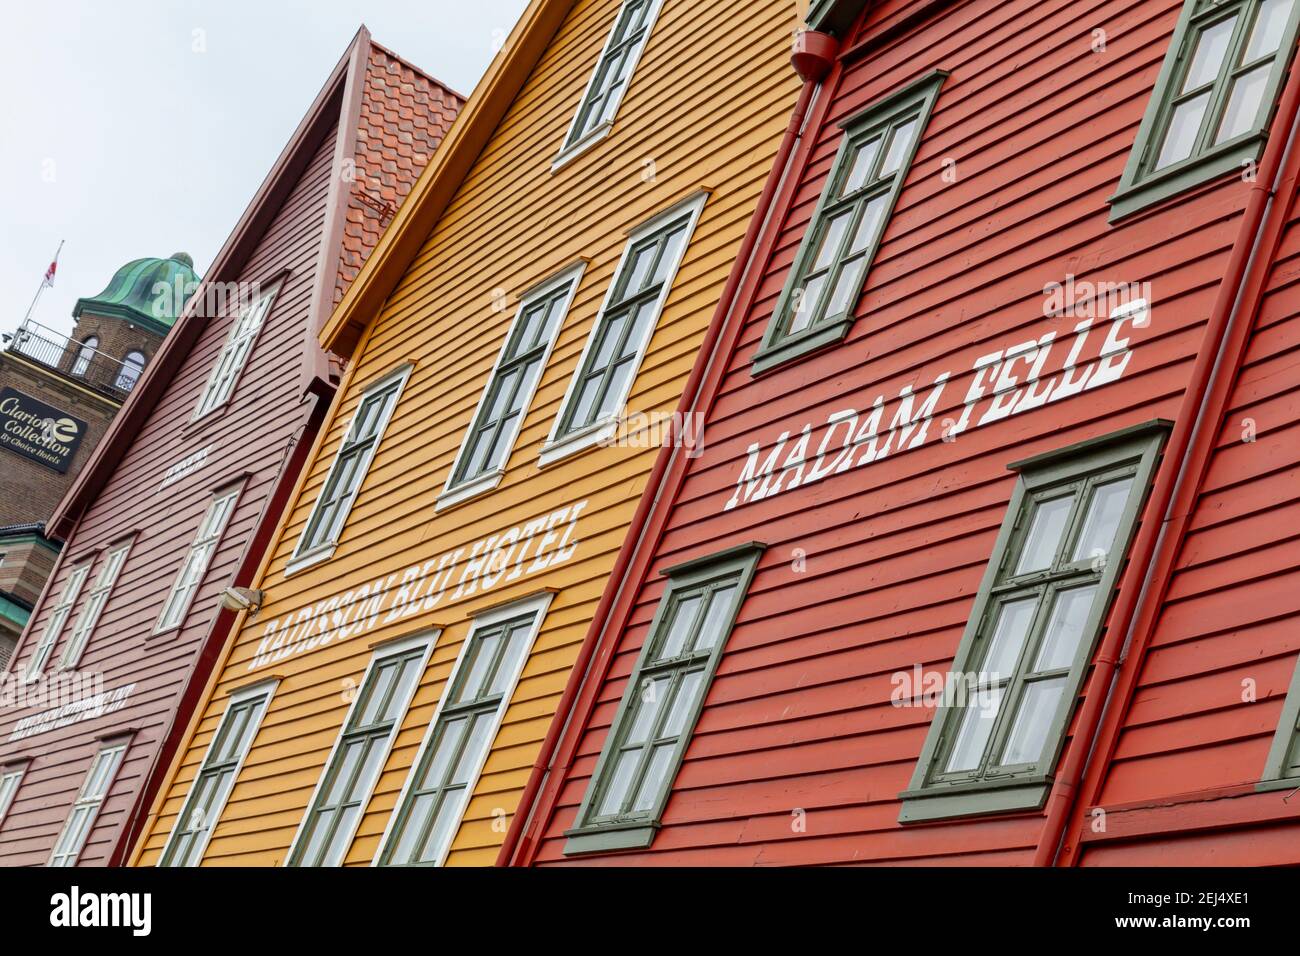 Colorful wooden houses on Bryggen, traditional architecture in the city of Bergen and UNESCO World Cultural Heritage Stock Photo